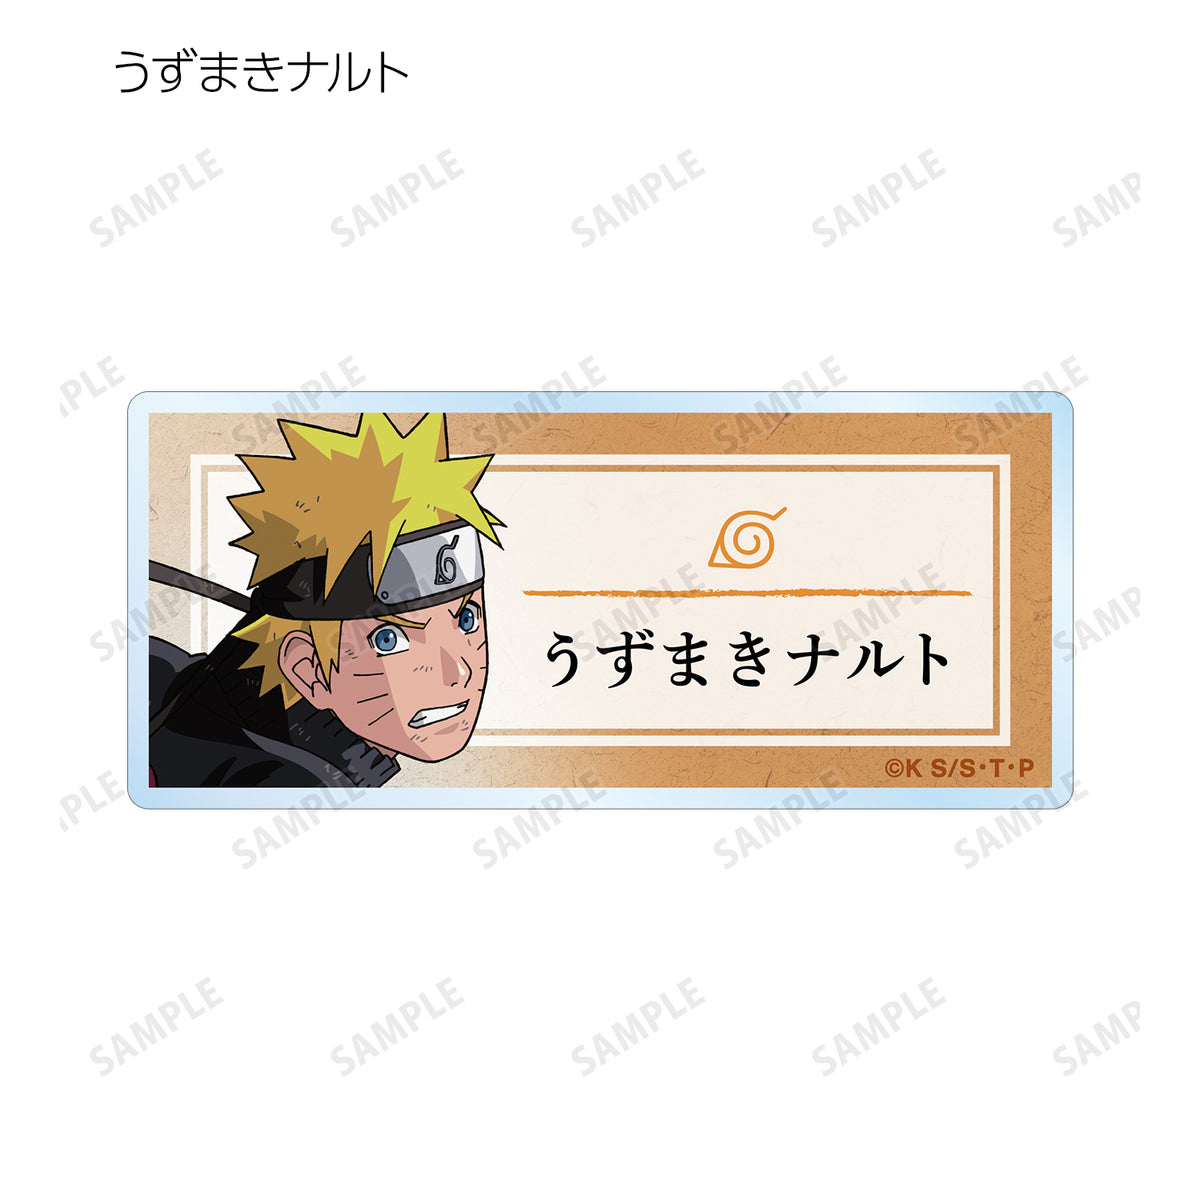 NARUTO カカシ 文教堂 アニメガ 缶バッジ | catalogoef.com.br